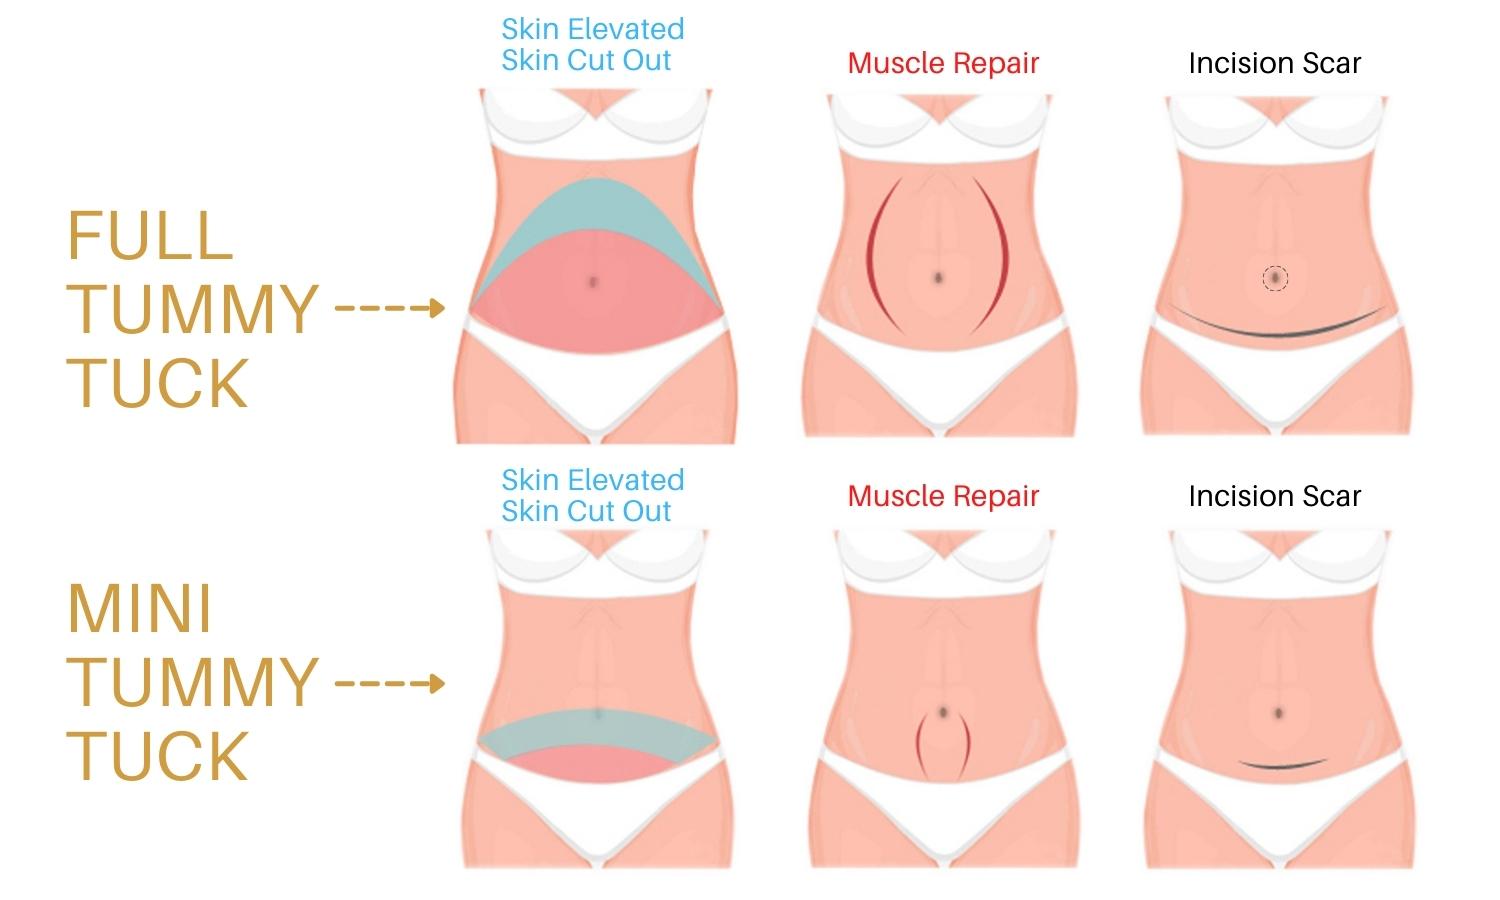 Scarless Tummy Tuck - Is it Possible?